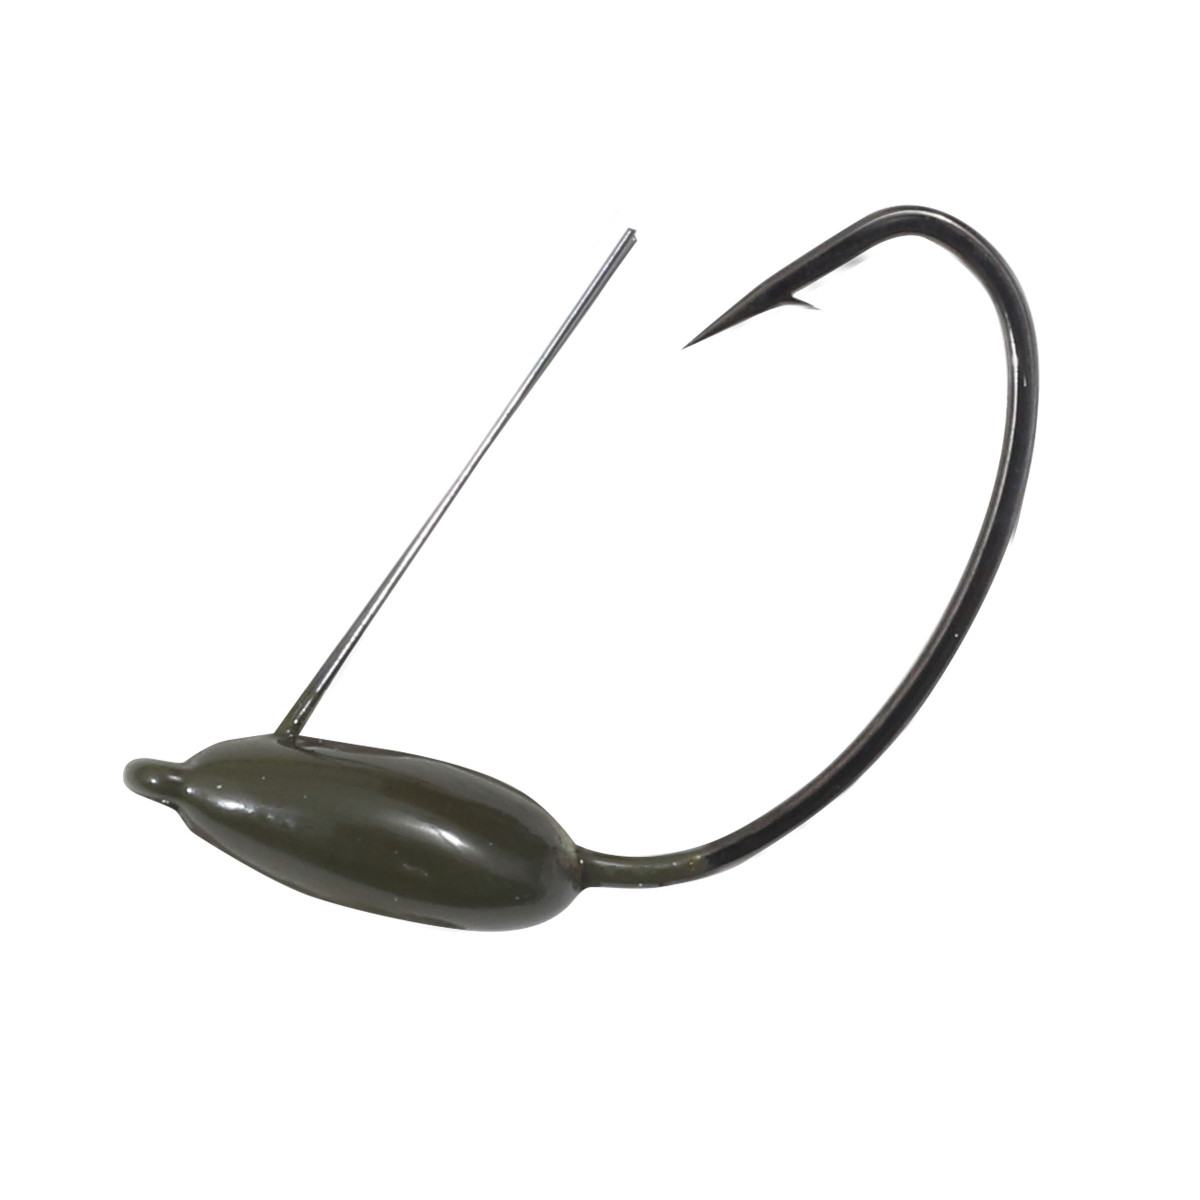 Northland Fishing Tackle Weedless Wacky Jig - JT Outdoor Products